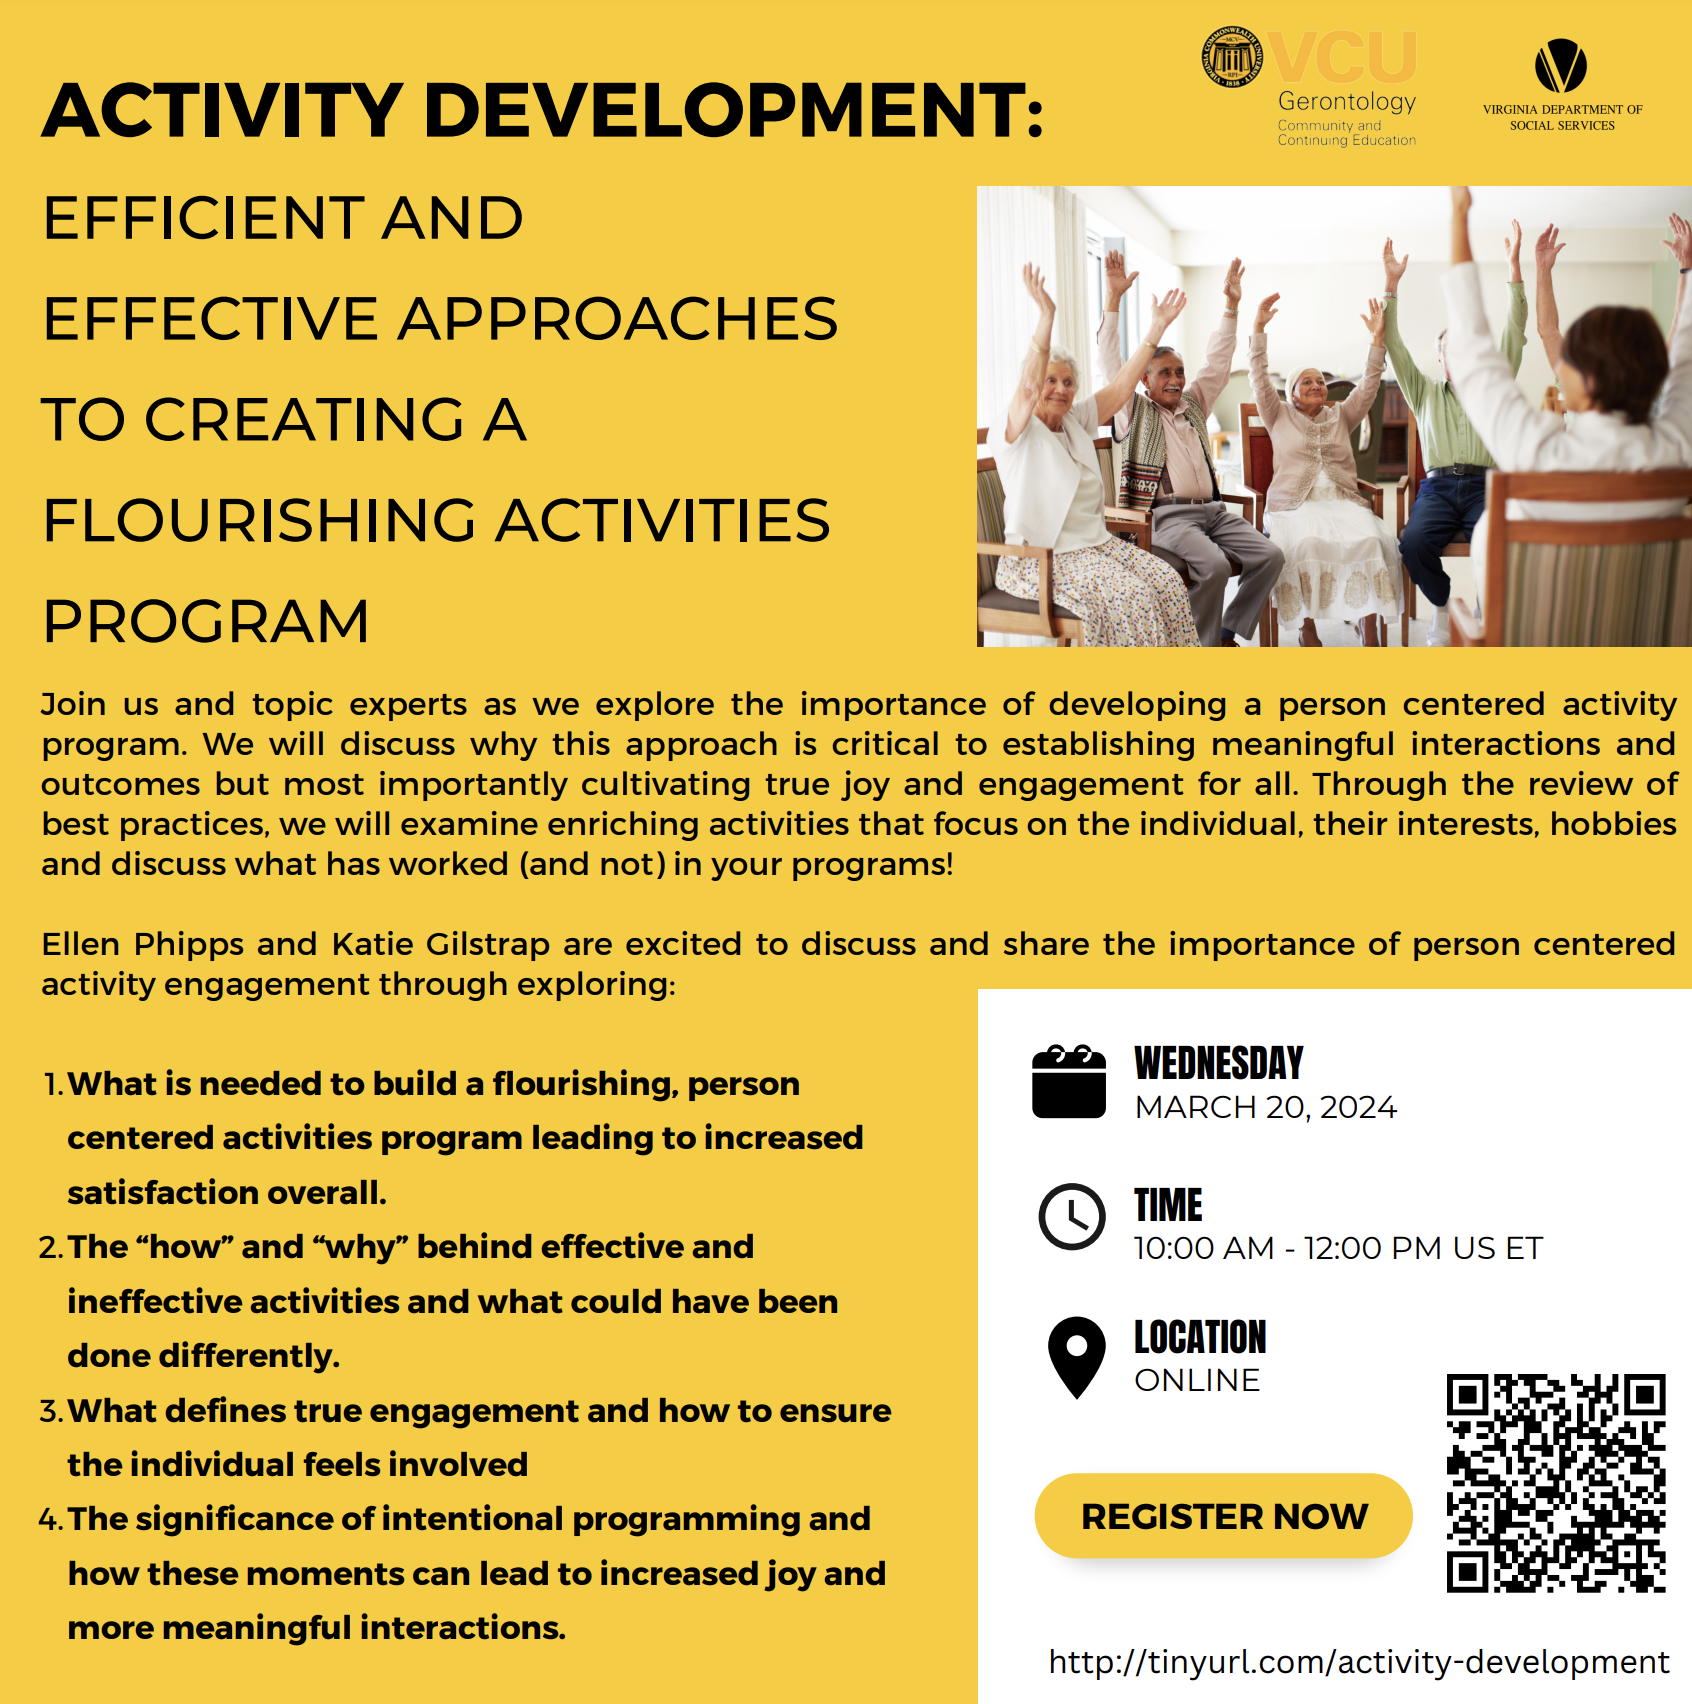 Activity Development: Efficient and Effective Approaches to Creating A Flourishing Activities Program